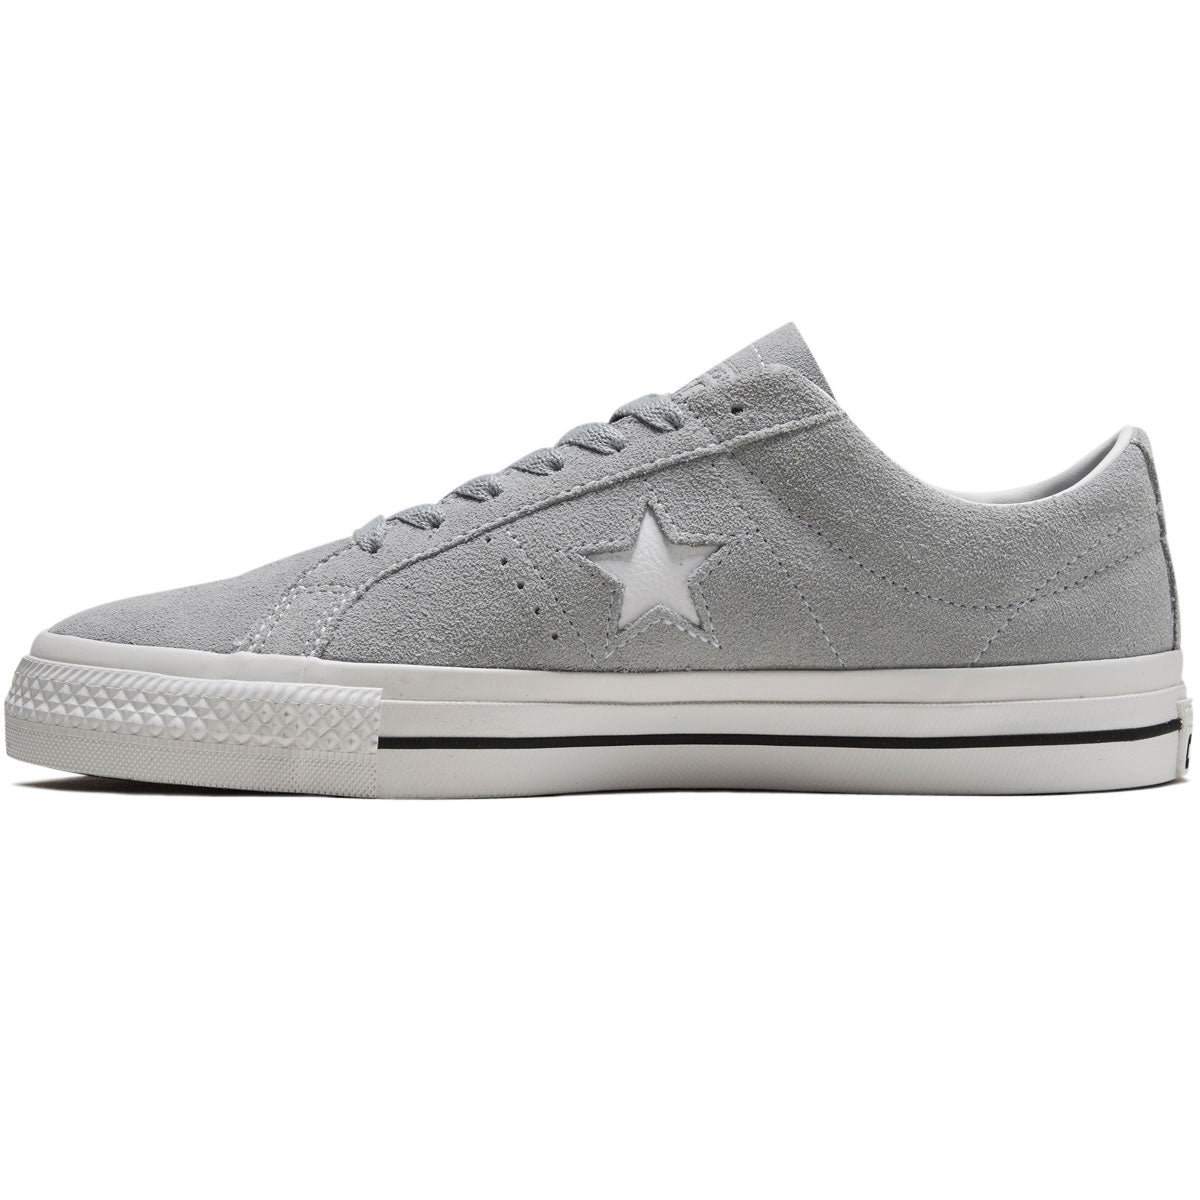 Converse One Star Pro Shoes - Wolf Grey/White/Black image 2